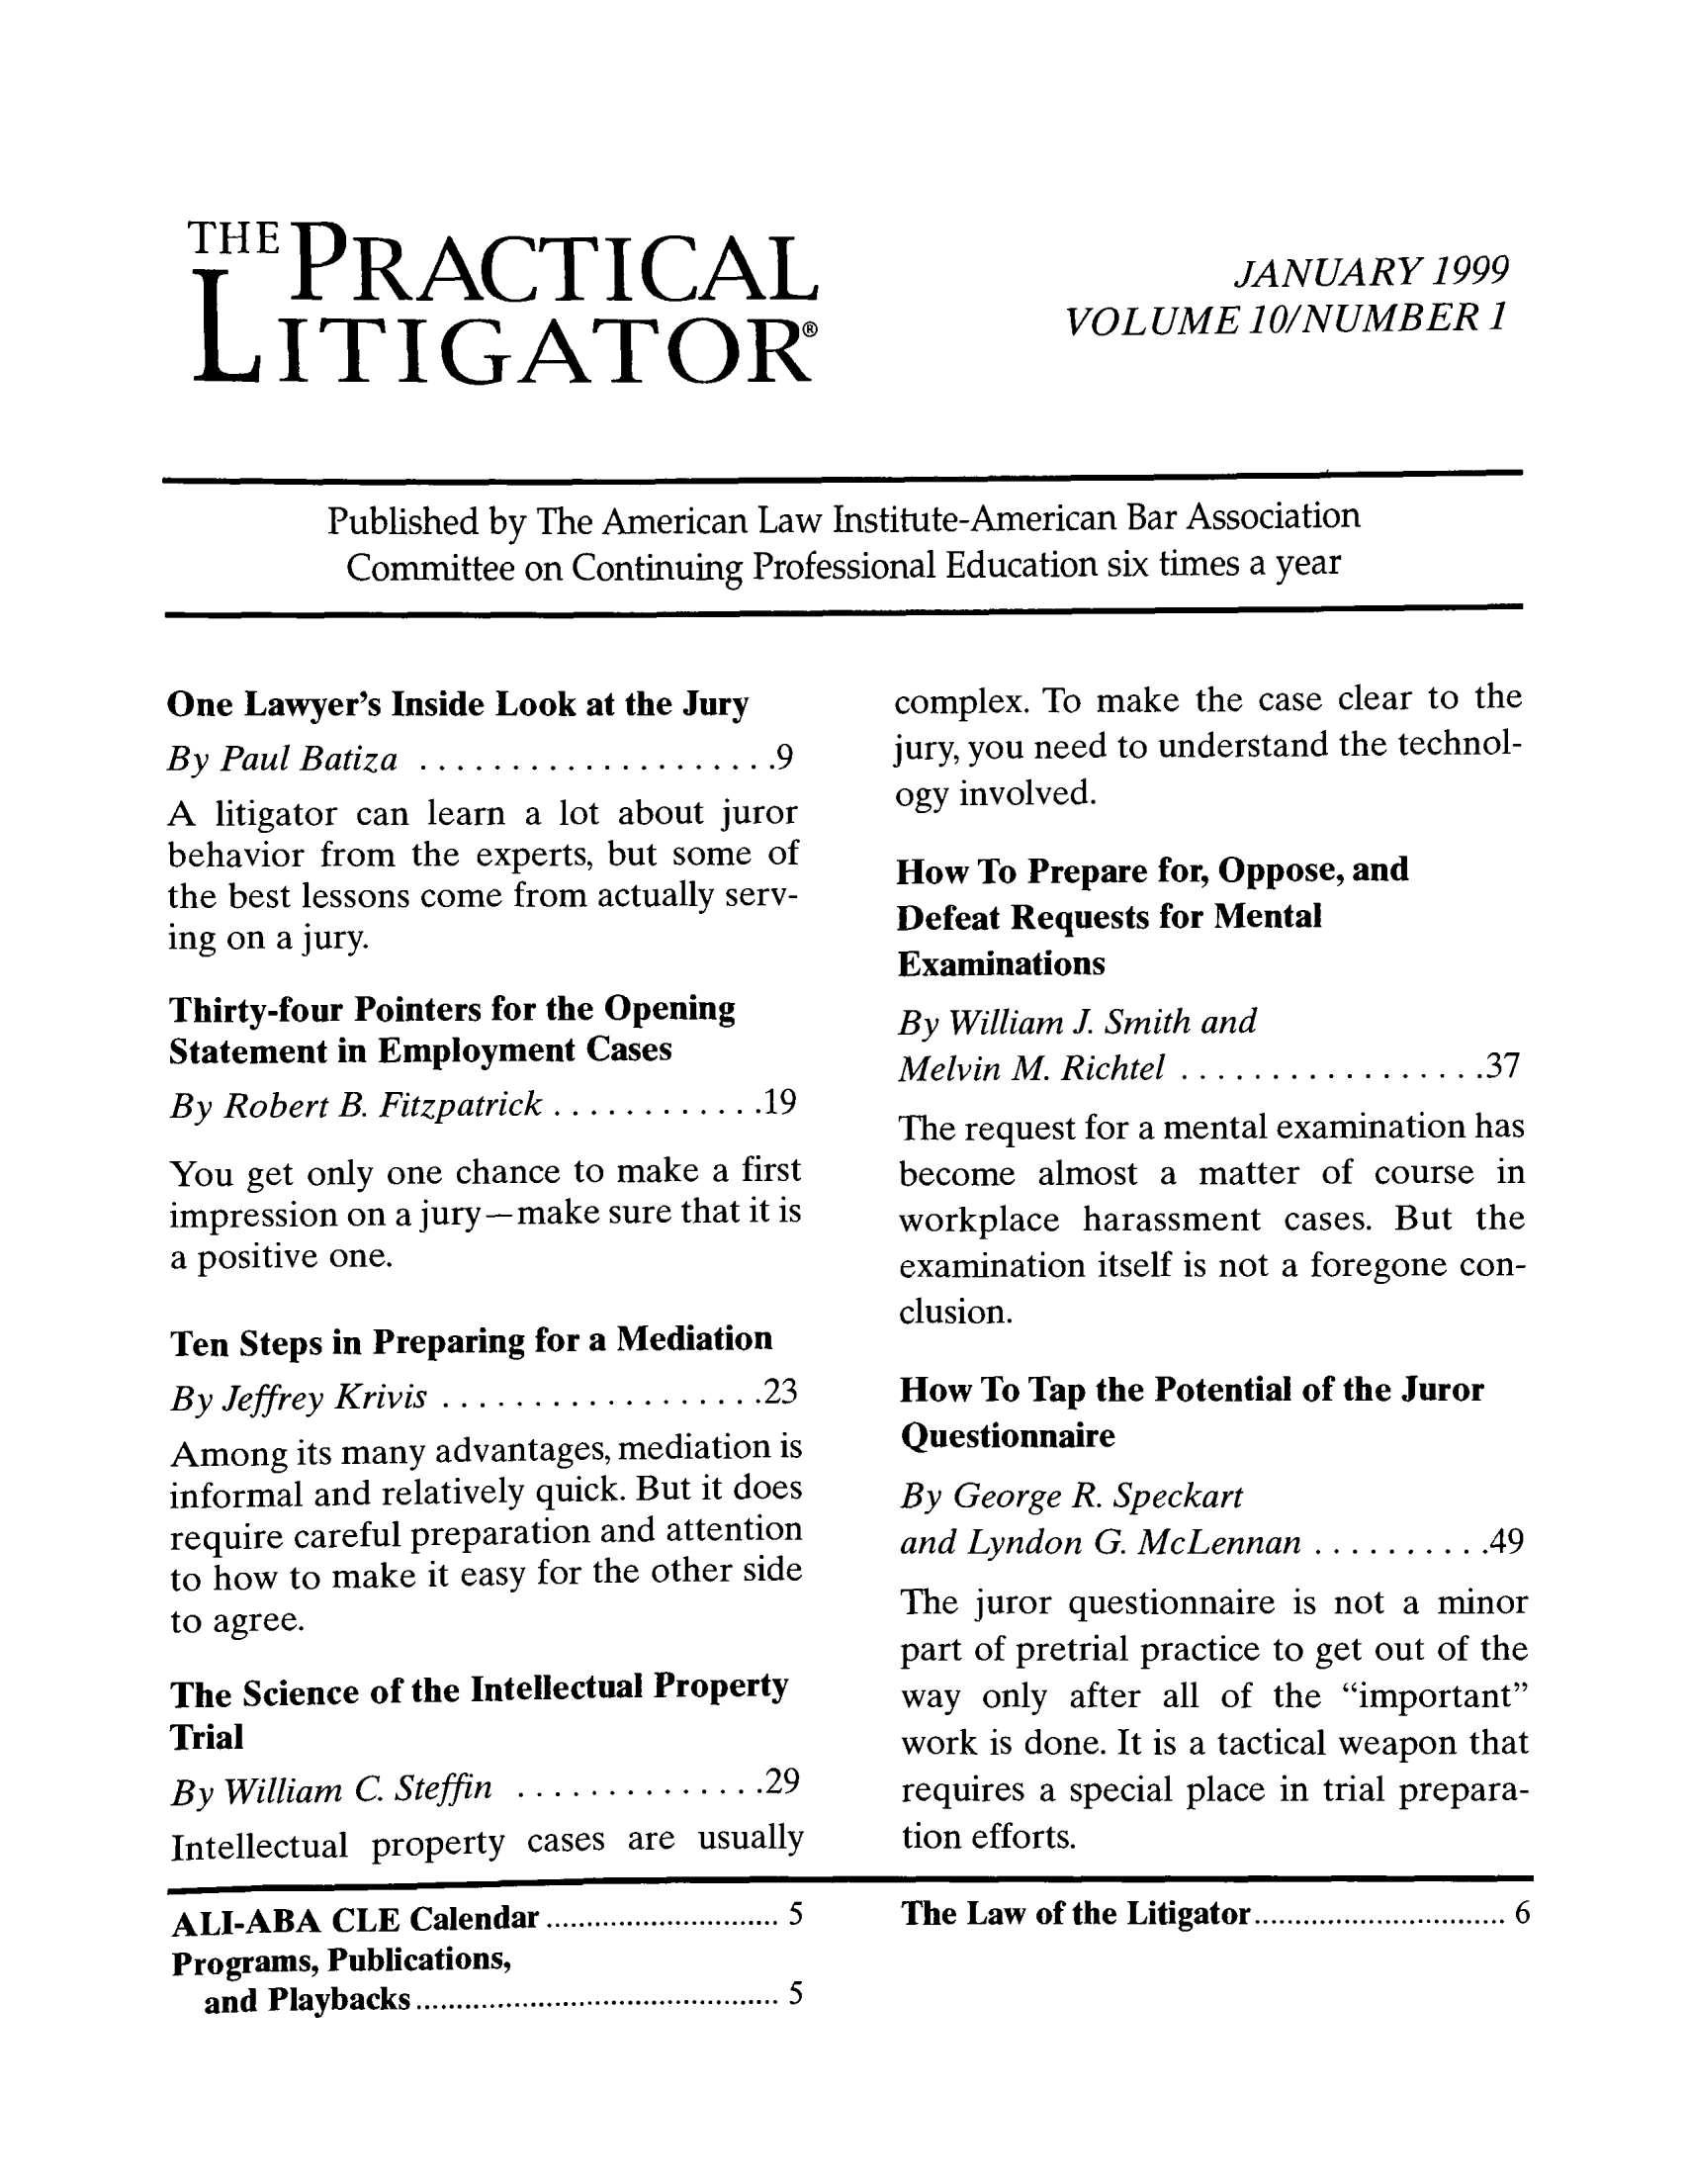 handle is hein.ali/practlit0010 and id is 1 raw text is: THE PRACTICAL
LITIGATOR

JANUARY 1999
VOLUME 1O/NUMBER 1

Published by The American Law Institute-American Bar Association
Committee on Continuing Professional Education six times a year

One Lawyer's Inside Look at the Jury
By Paul Batiza..................9
A litigator can learn a lot about juror
behavior from the experts, but some of
the best lessons come from actually serv-
ing on a jury.
Thirty-four Pointers for the Opening
Statement in Employment Cases
By Robert B. Fitzpatrick.............19
You get only one chance to make a first
impression on a jury--make sure that it is
a positive one.
Ten Steps in Preparing for a Mediation
By Jeffrey Krivis........... .......023
Among its many advantages, mediation is
informal and relatively quick. But it does
require careful preparation and attention
to how to make it easy for the other side
to agree.
The Science of the Intellectual Property
Trial
By William C. Steffin............. 29
Intellectual property cases are usually

complex. To make the case clear to the
jury, you need to understand the technol-
ogy involved.
How To Prepare for, Oppose, and
Defeat Requests for Mental
Examinations
By William J Smith and
Melvin M. Richtel................37
The request for a mental examination has
become almost a matter of course in
workplace harassment cases. But the
examination itself is not a foregone con-
clusion.
How To Tap the Potential of the Juror
Questionnaire
By George R. Speckart
and Lyndon G. McLennan...........49
The juror questionnaire is not a minor
part of pretrial practice to get out of the
way only after all of the important
work is done. It is a tactical weapon that
requires a special place in trial prepara-
tion efforts.

ALI-ABA CLE Calendar................. 5
Programs, Publications,
and Playbacks...................... 5

The Law of the Litigator.................. 6

                       I                                                                 I           I                                                                                                                     I                                                                  I                               II                                       I                                                                                    I


